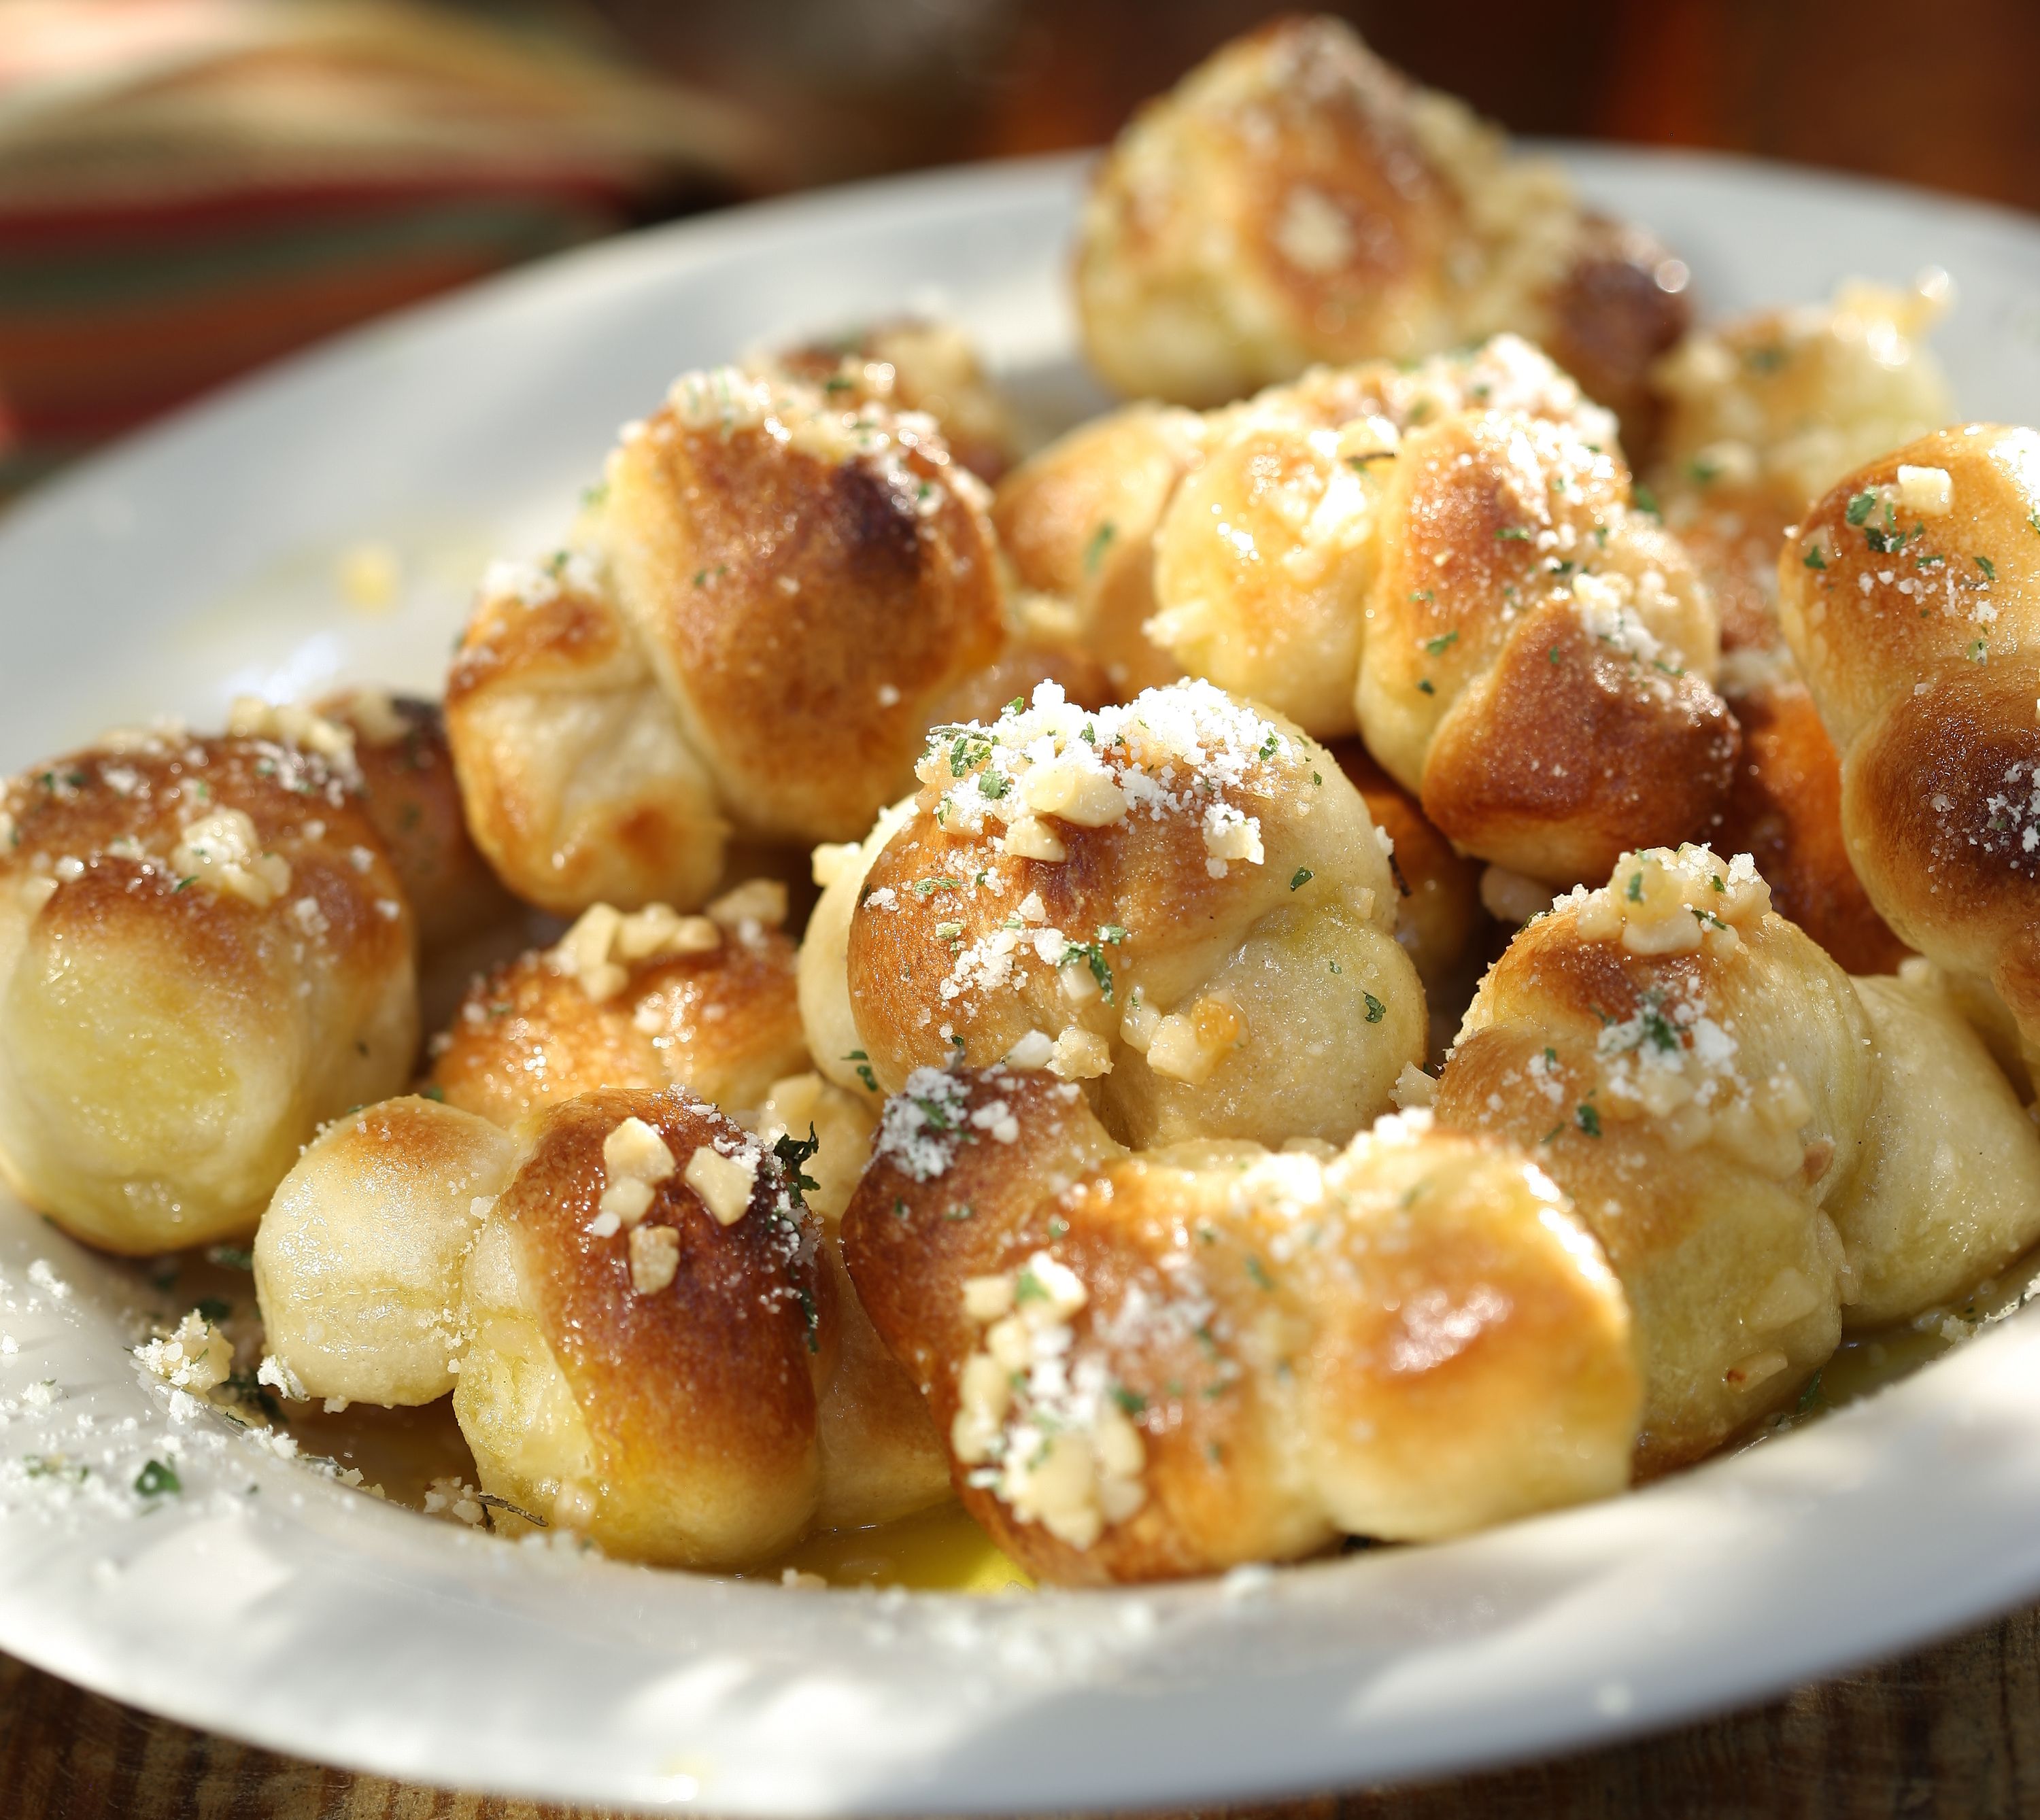 MINI GARLIC KNOTS - Our pizza dough rolled and tied into knots, baked, then smothered in melted butt Johnny's New York Style Pizza Snellville (770)978-8180